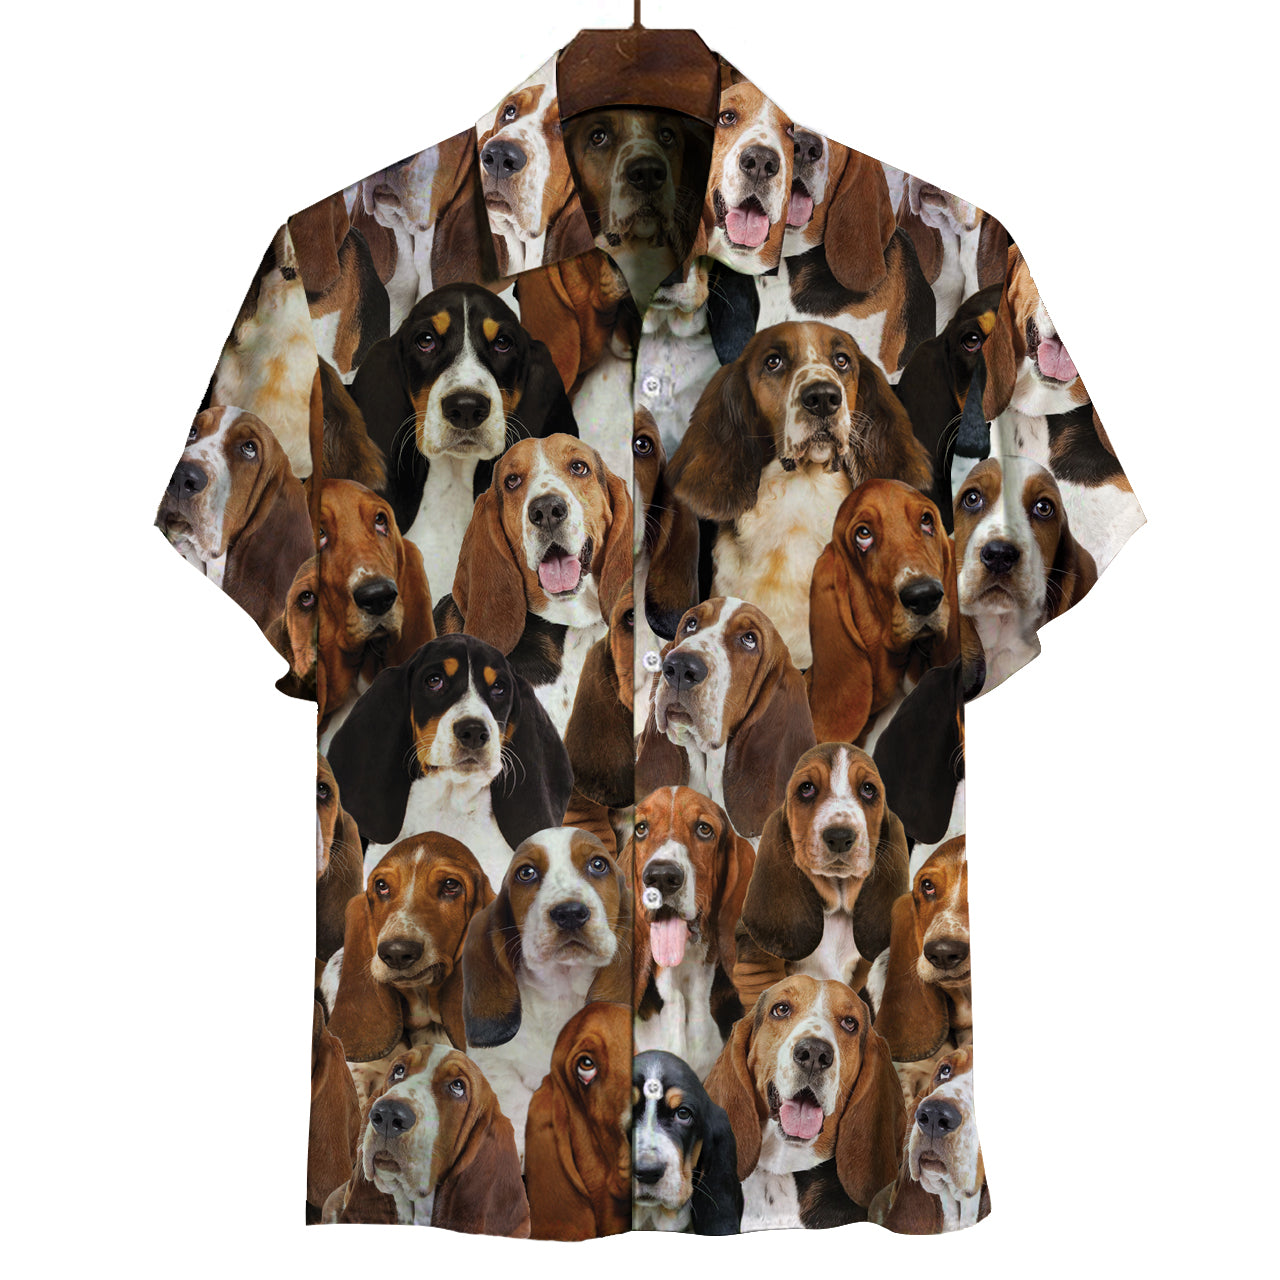 You Will Have A Bunch Of Basset Hounds - Shirt V1